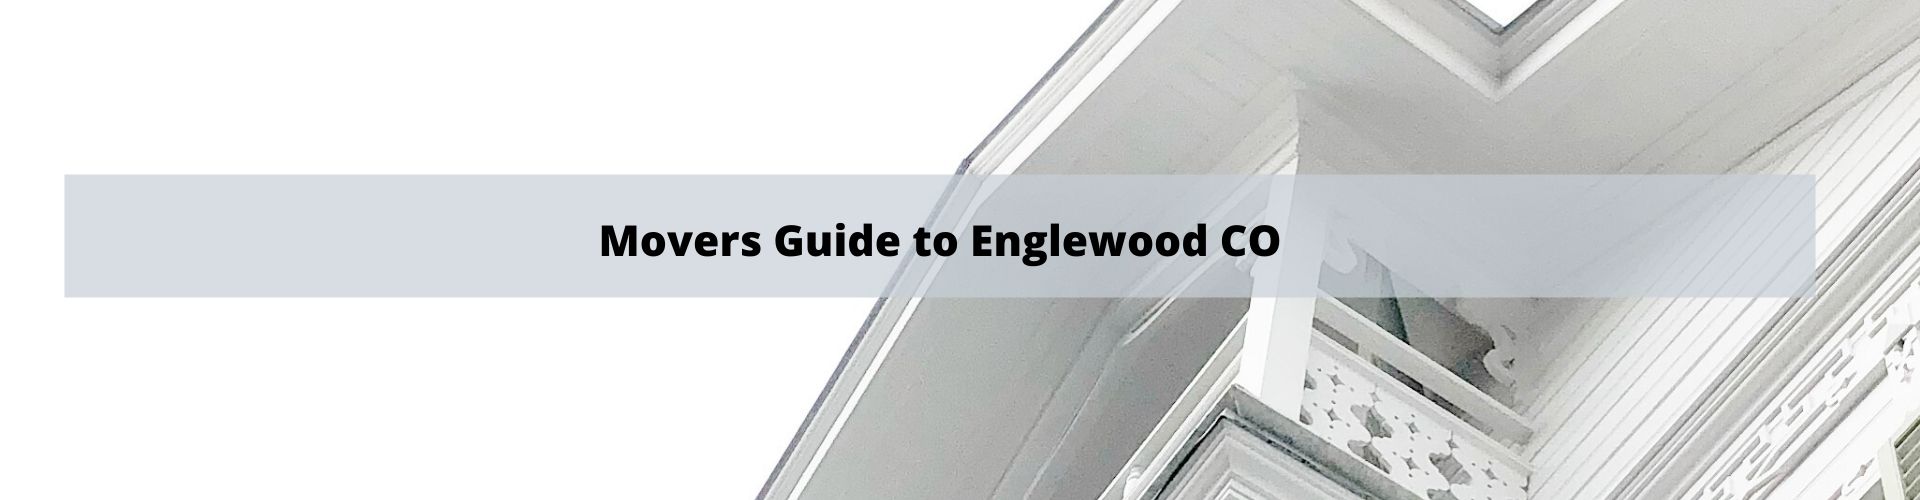 Mover's Guide to Englewood CO